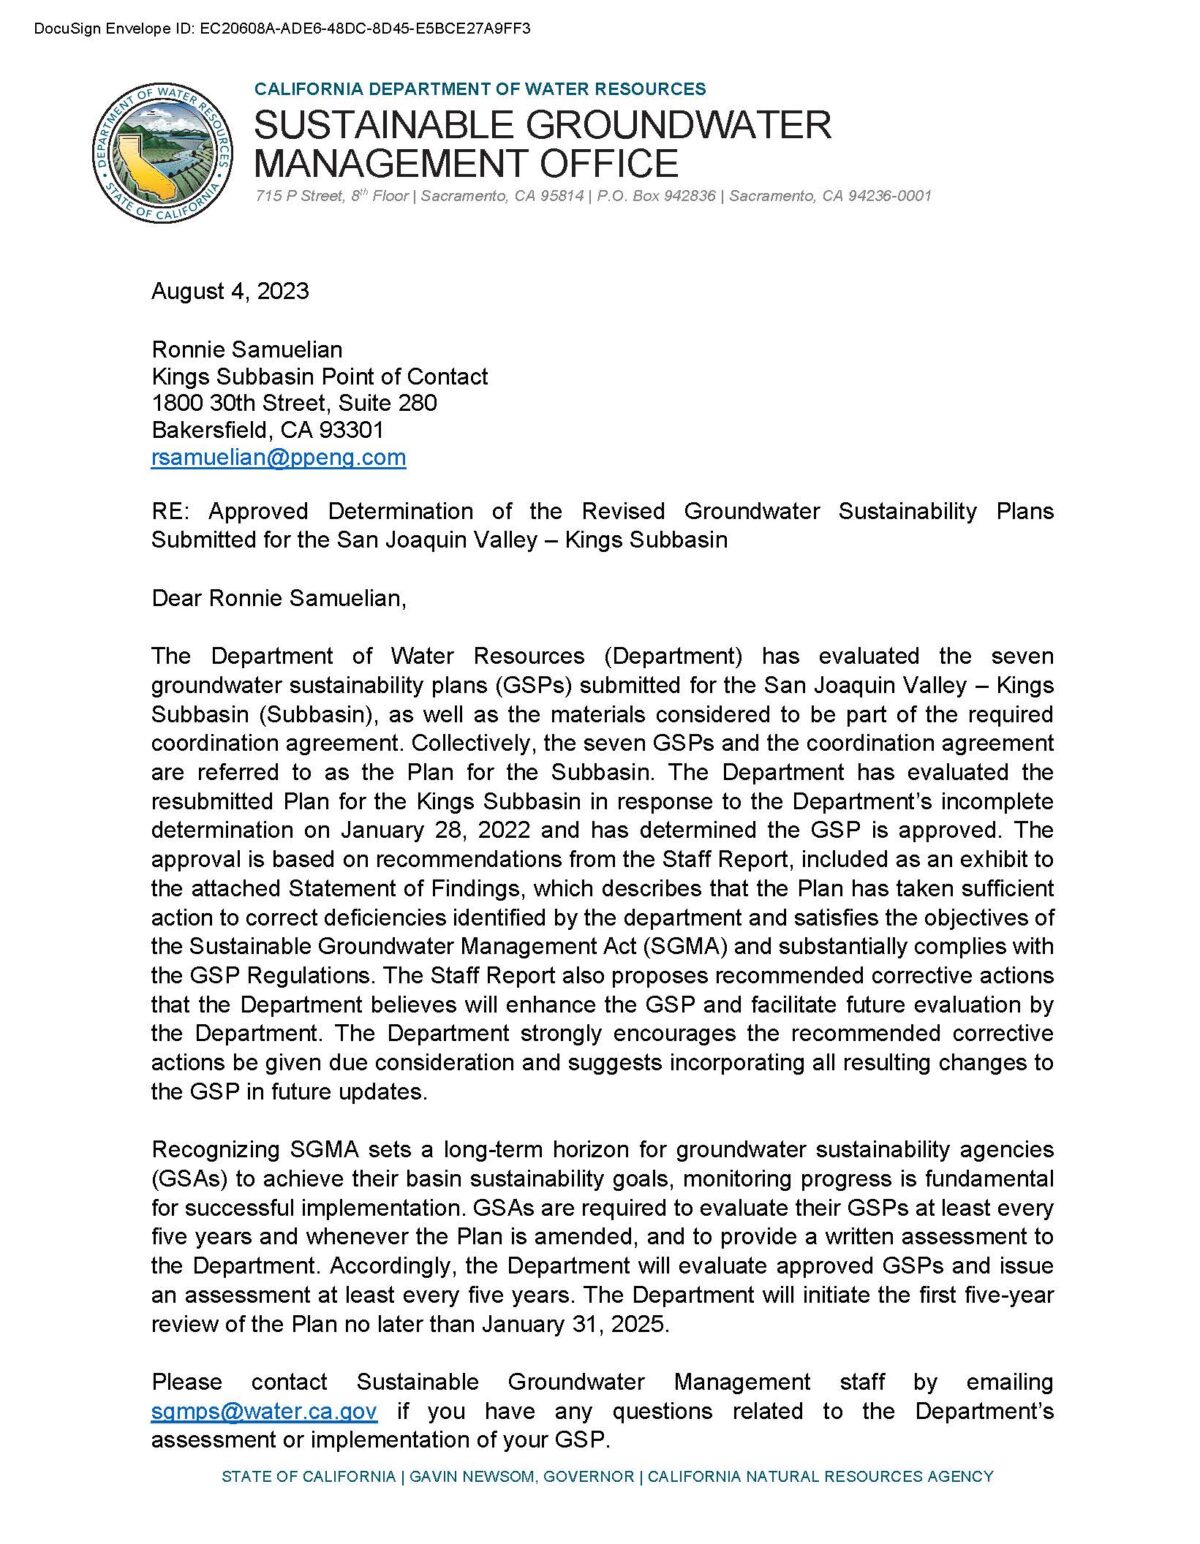 Statement of Findings regarding the Approval of the San Joaquin Valley – Kings Subbasin Groundwater Sustainability Plan